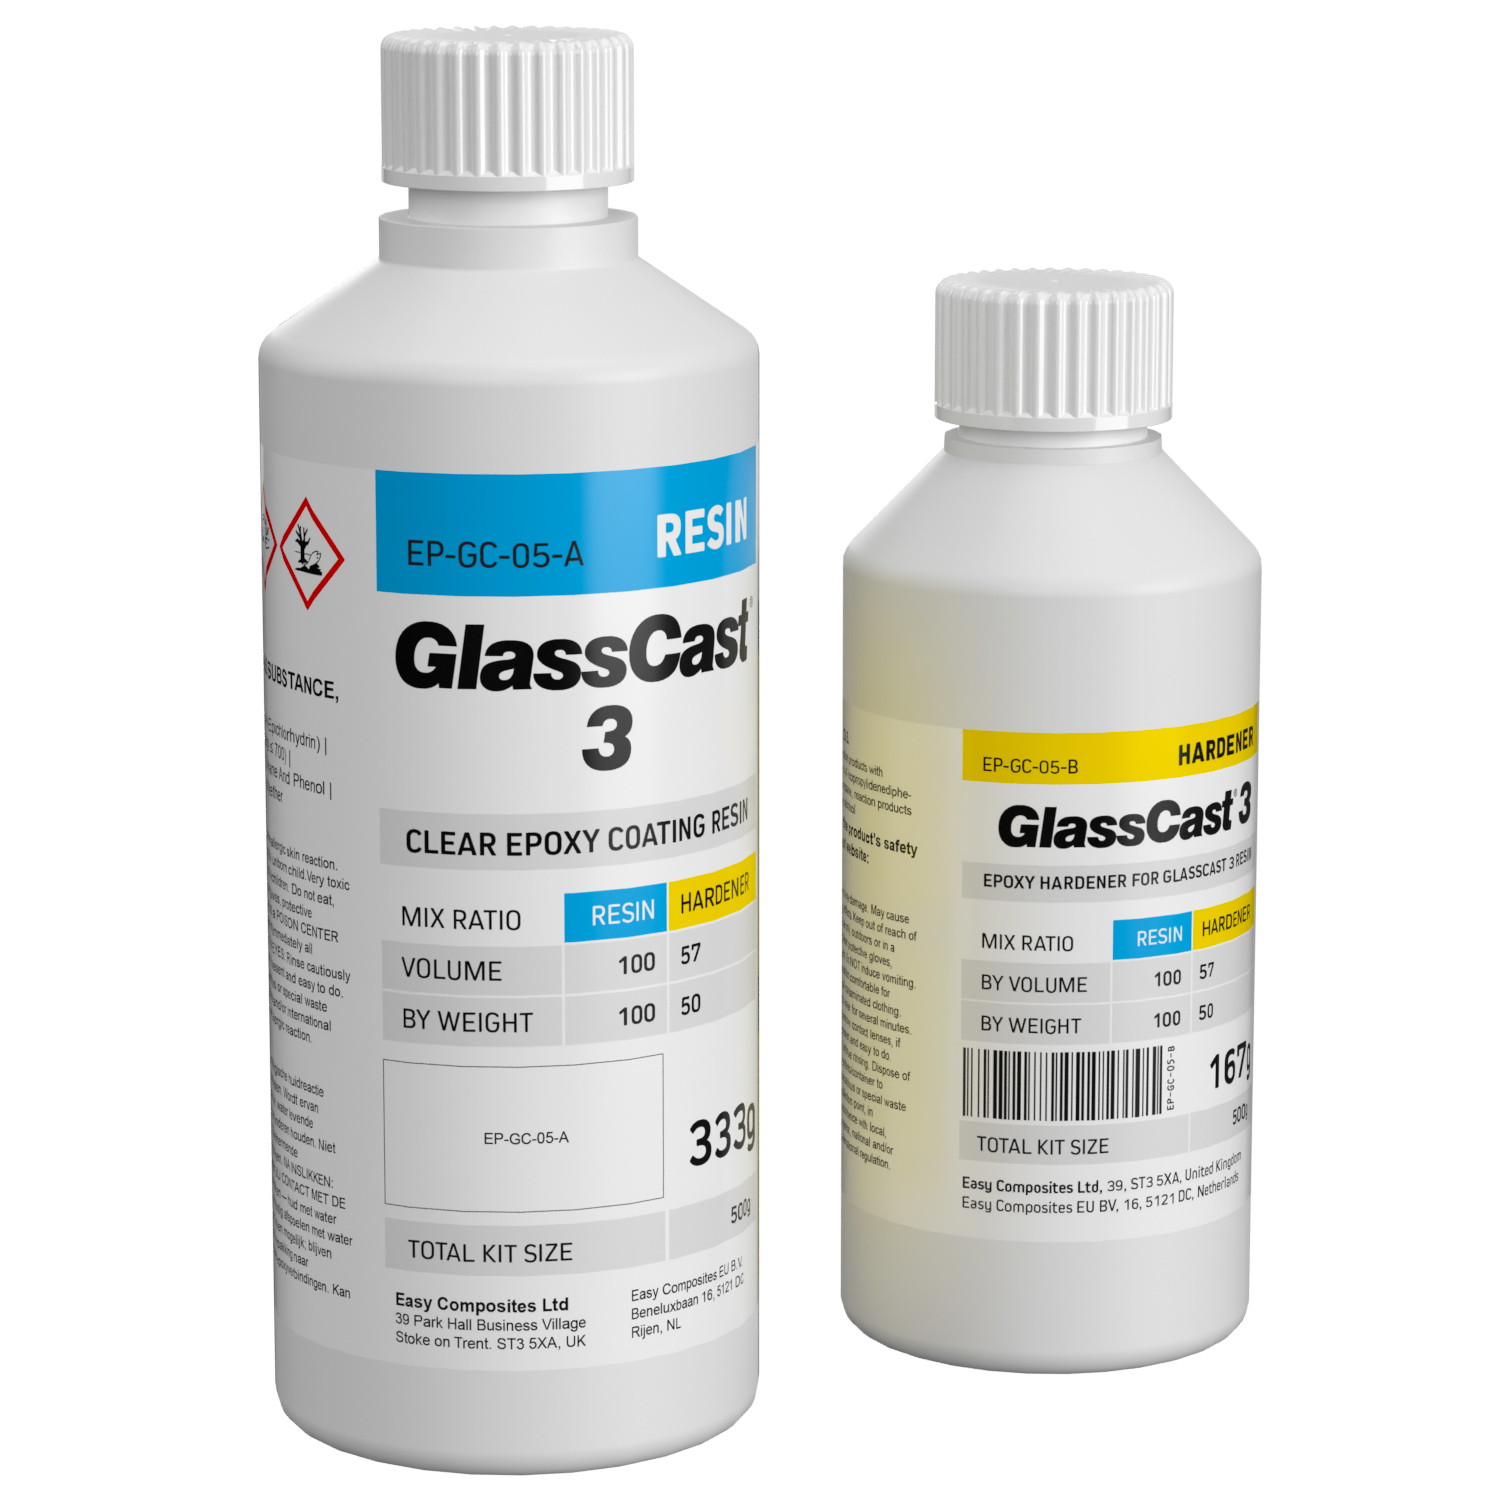 GlassCast 3 Clear Epoxy Coating Resin - Easy Composites